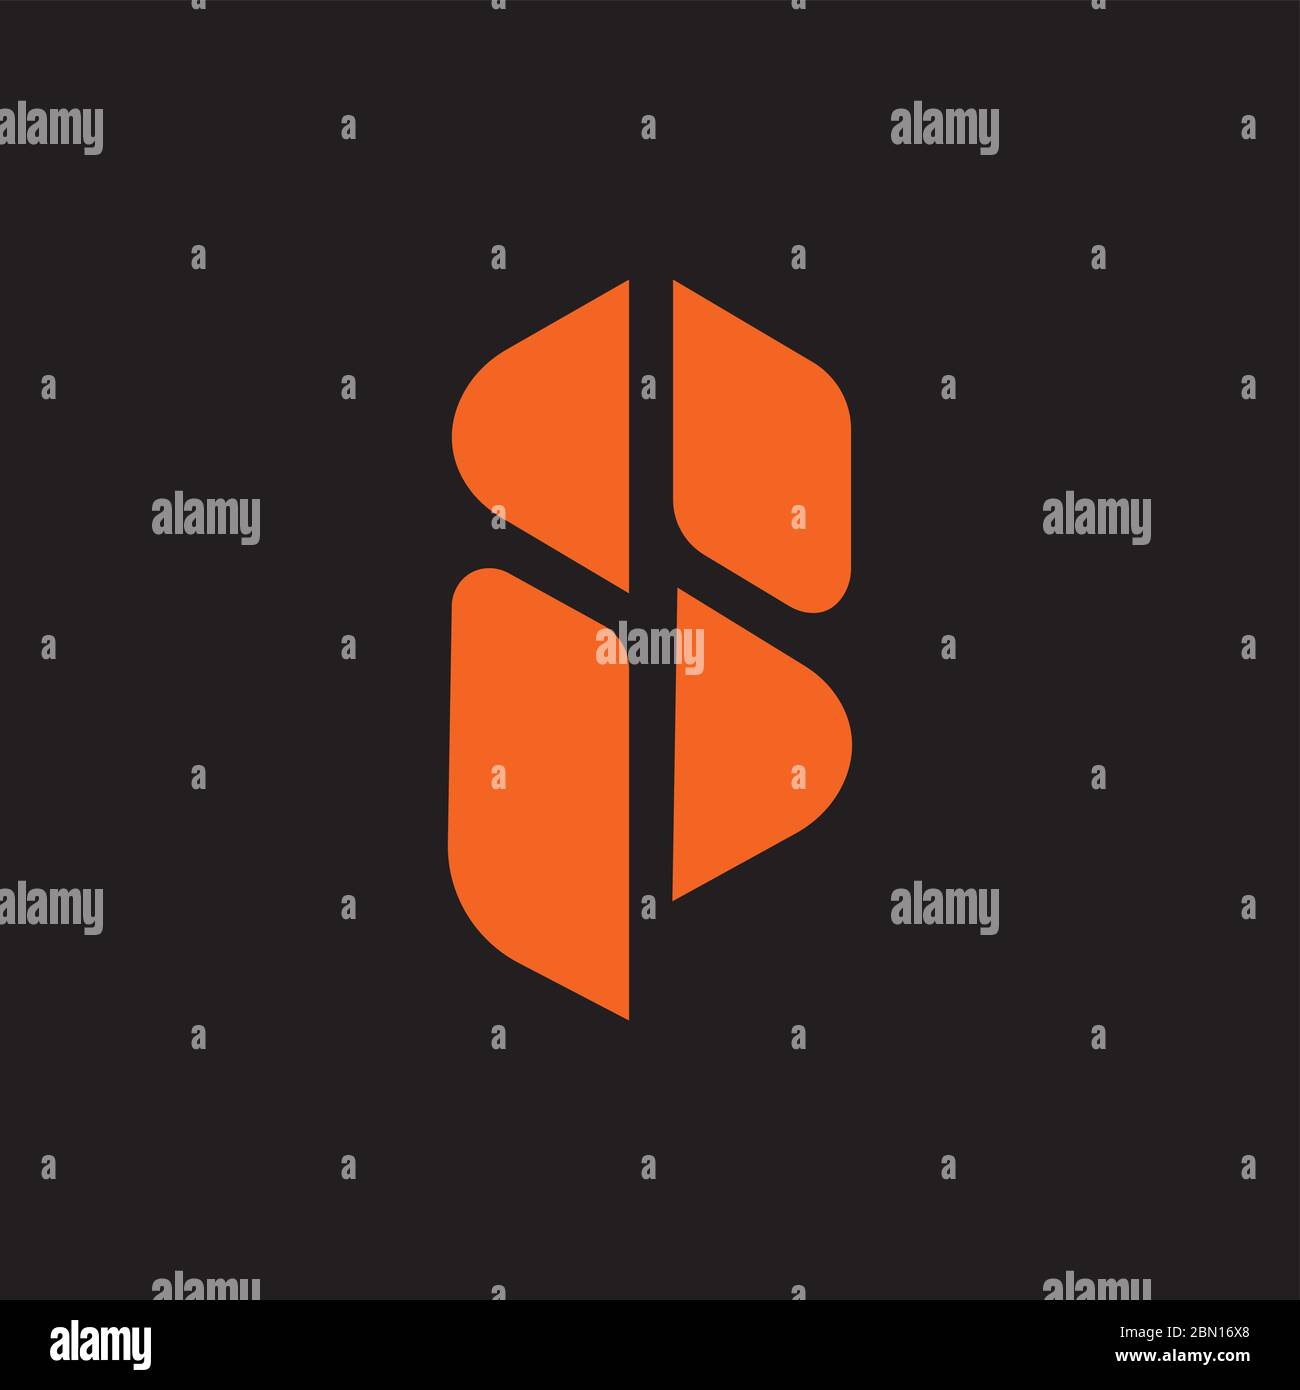 Initial letter is logo or si logo vector design template Stock Vector